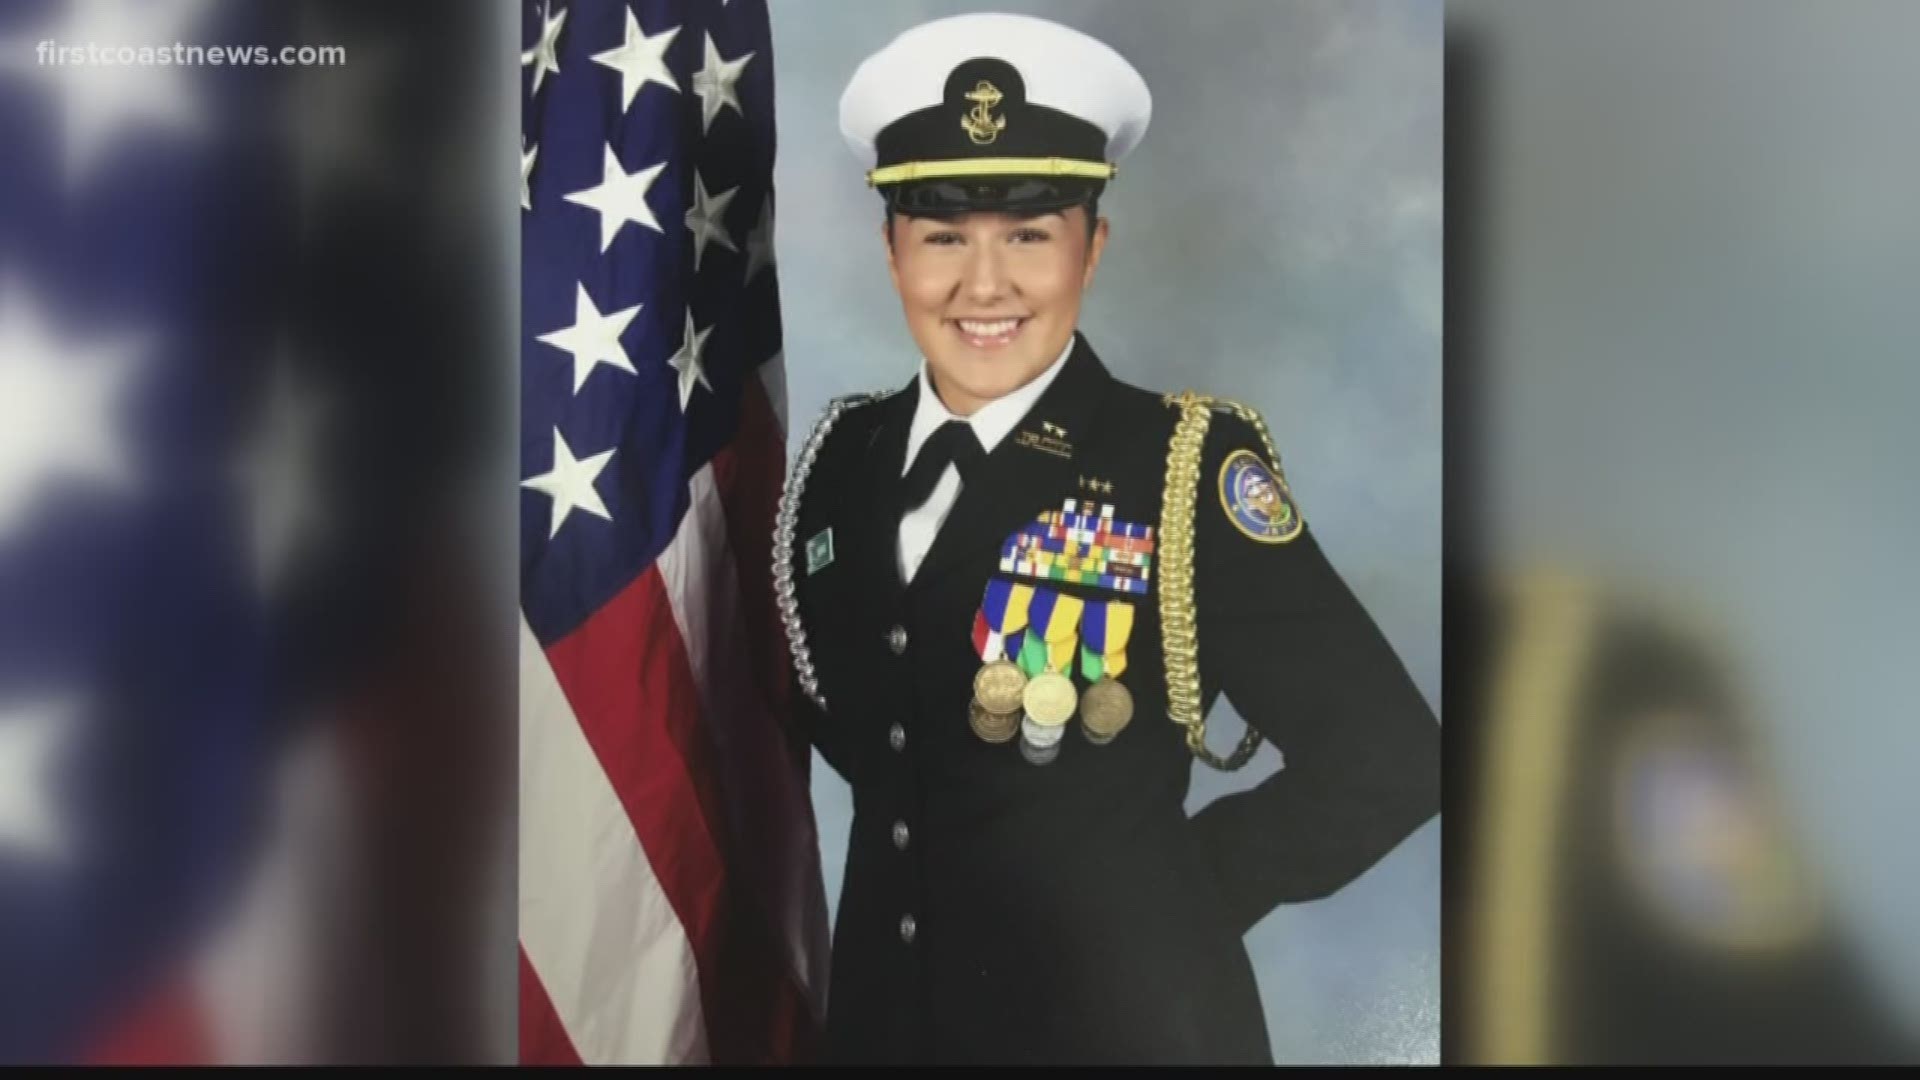 The parents are business owners and the daughter, Medina Belkic, who wants nothing more than to serve in the U.S. Navy, is a senior at Nease High School who is about to graduate.